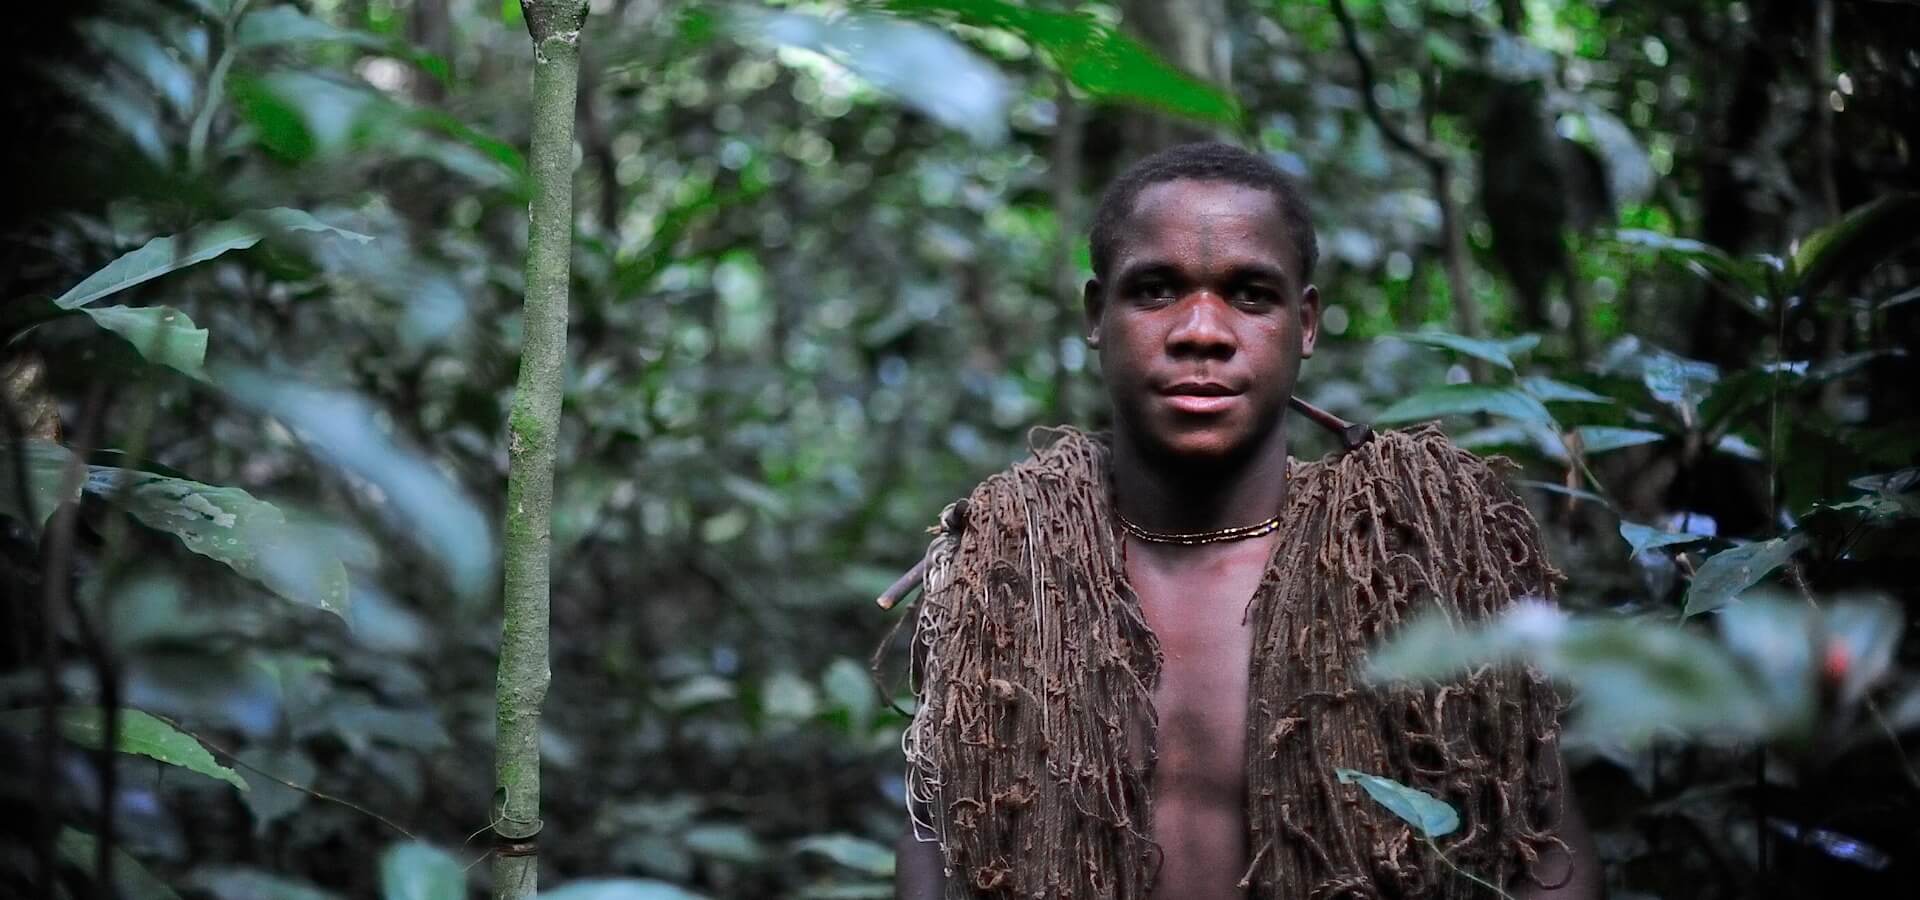 Portrait of an afro descendant man in the forest